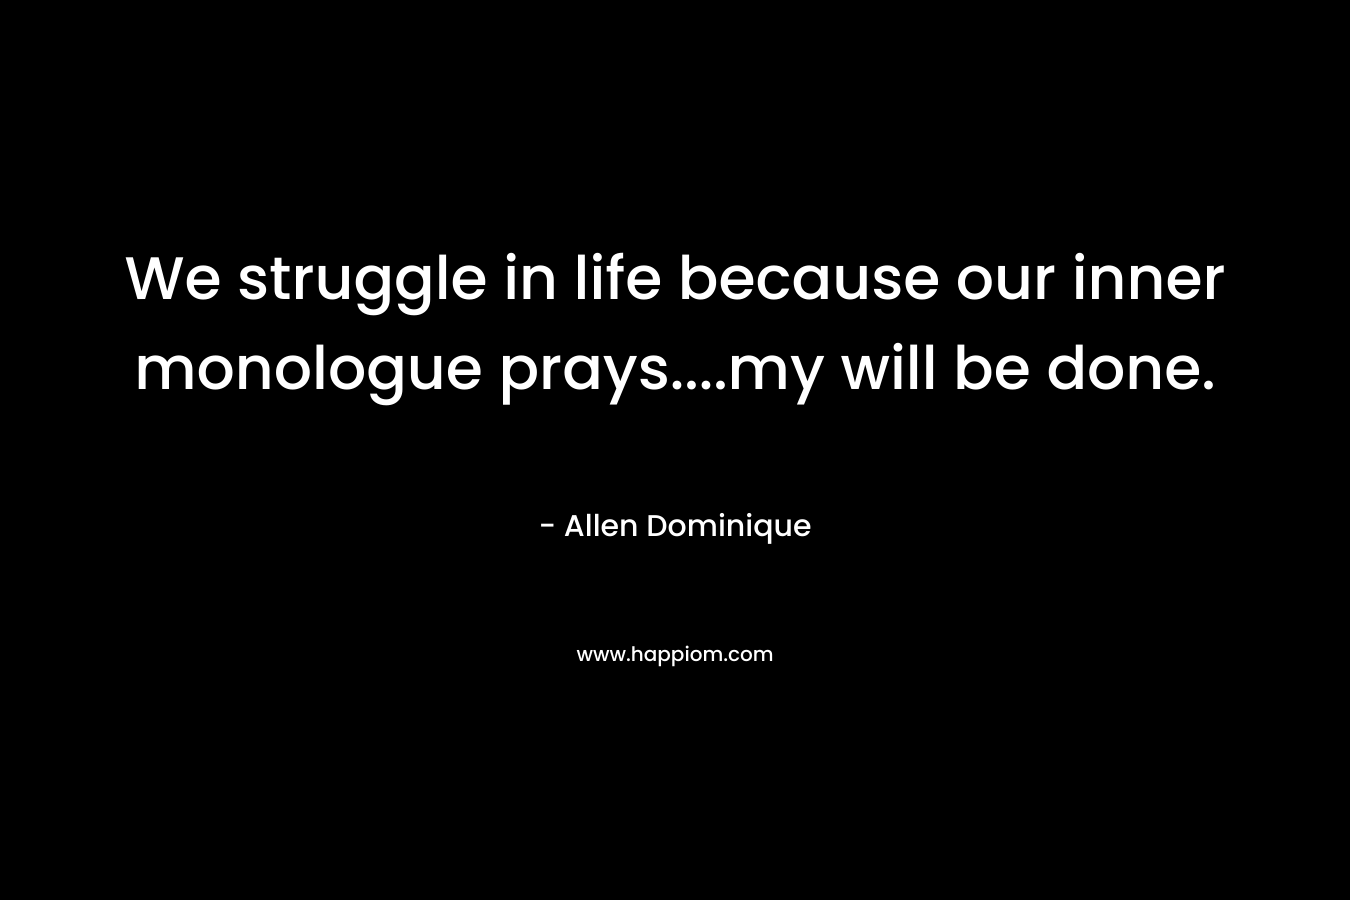 We struggle in life because our inner monologue prays….my will be done. – Allen Dominique